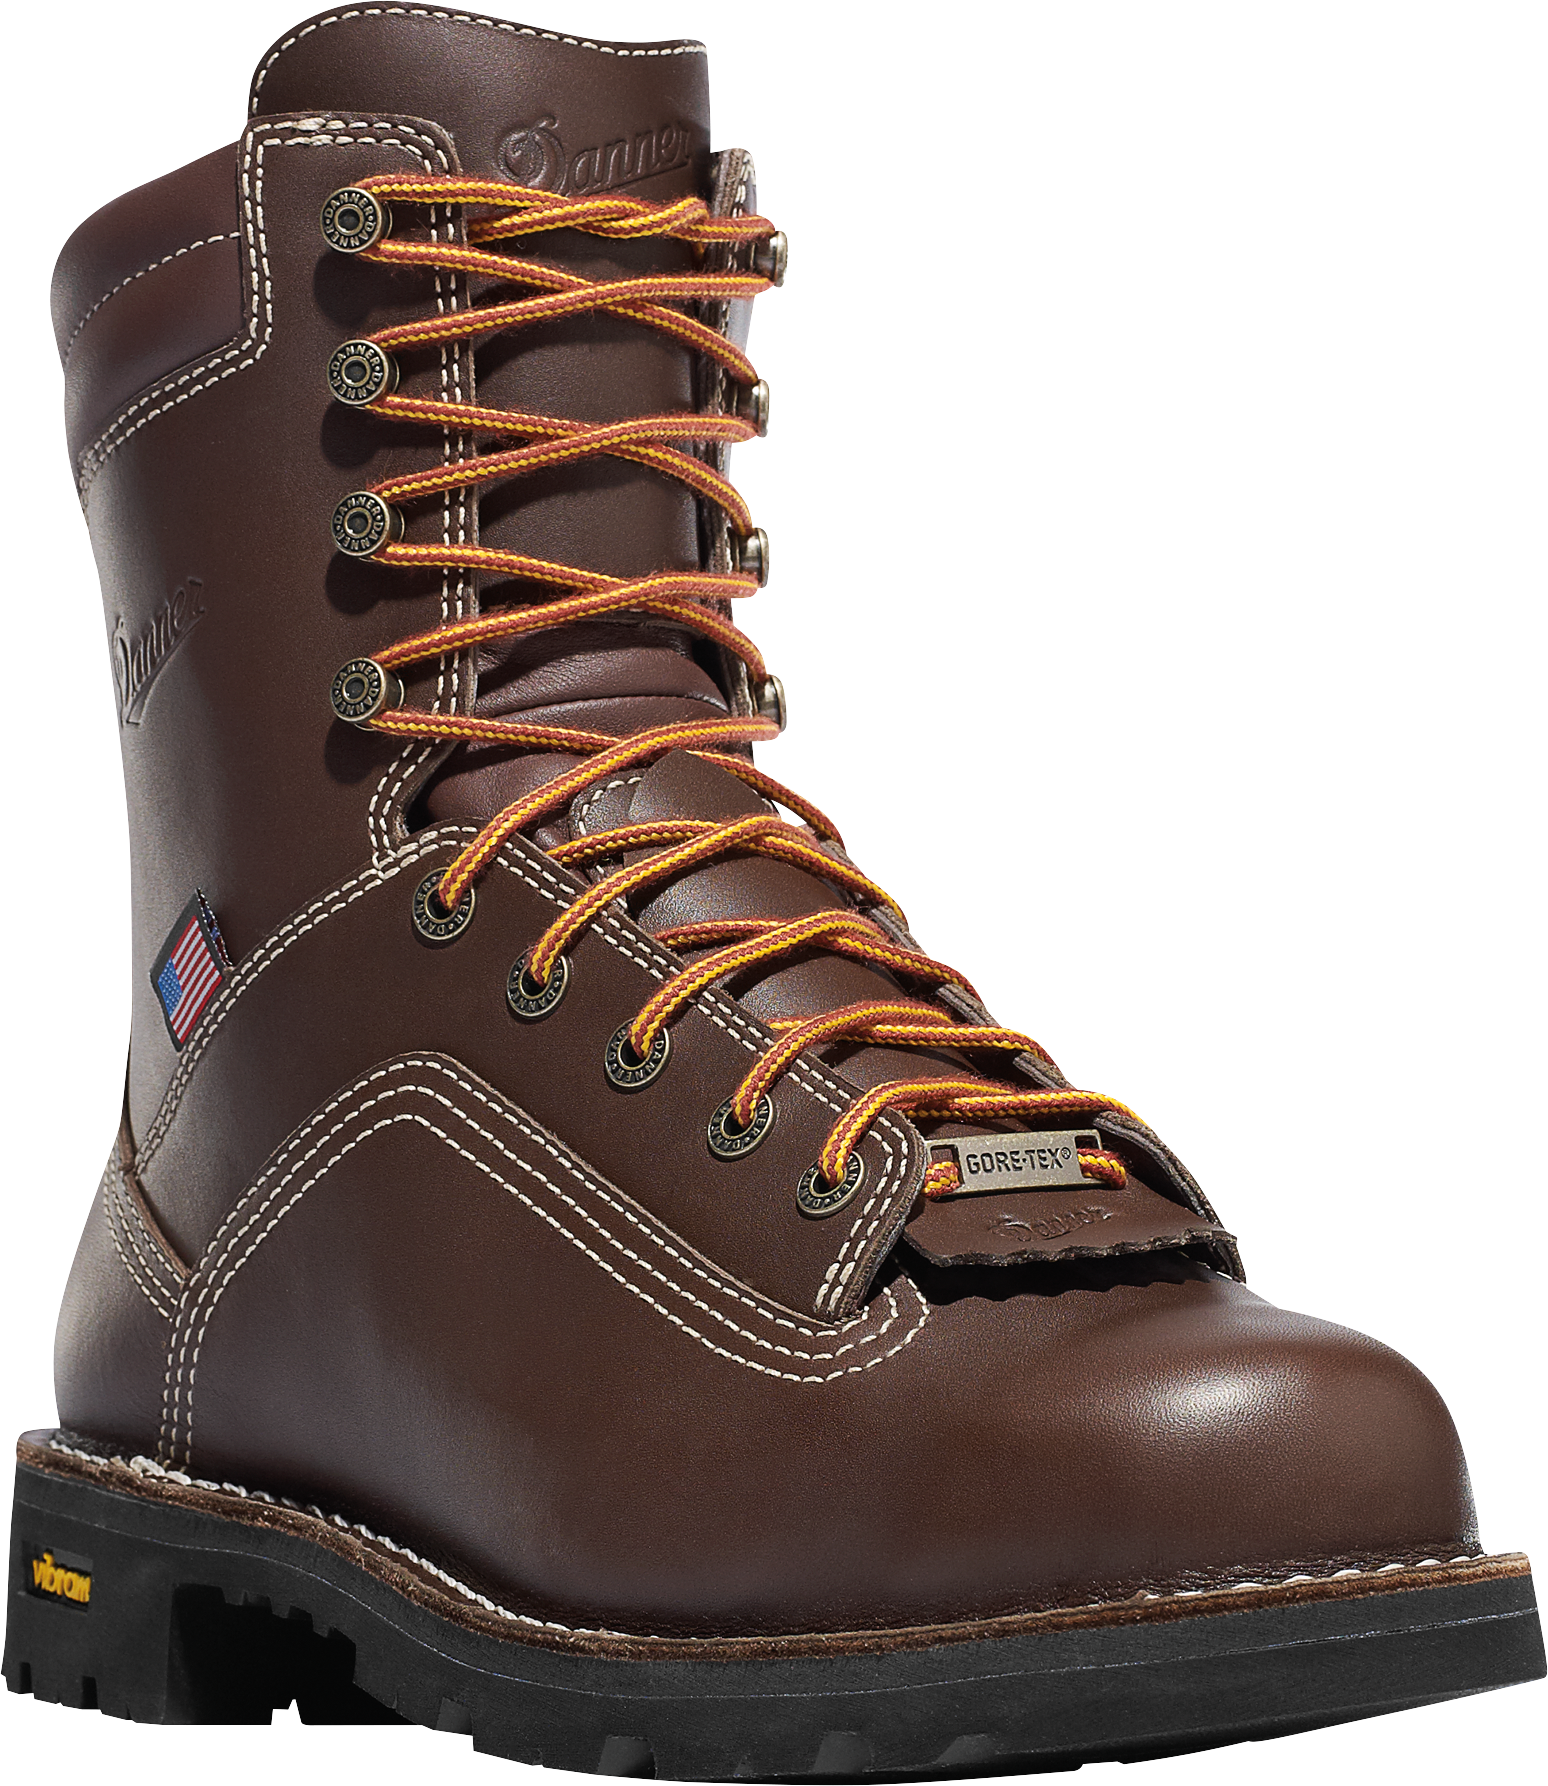 Danner Quarry USA GORE-TEX Work Boots for Men - Brown - 8M